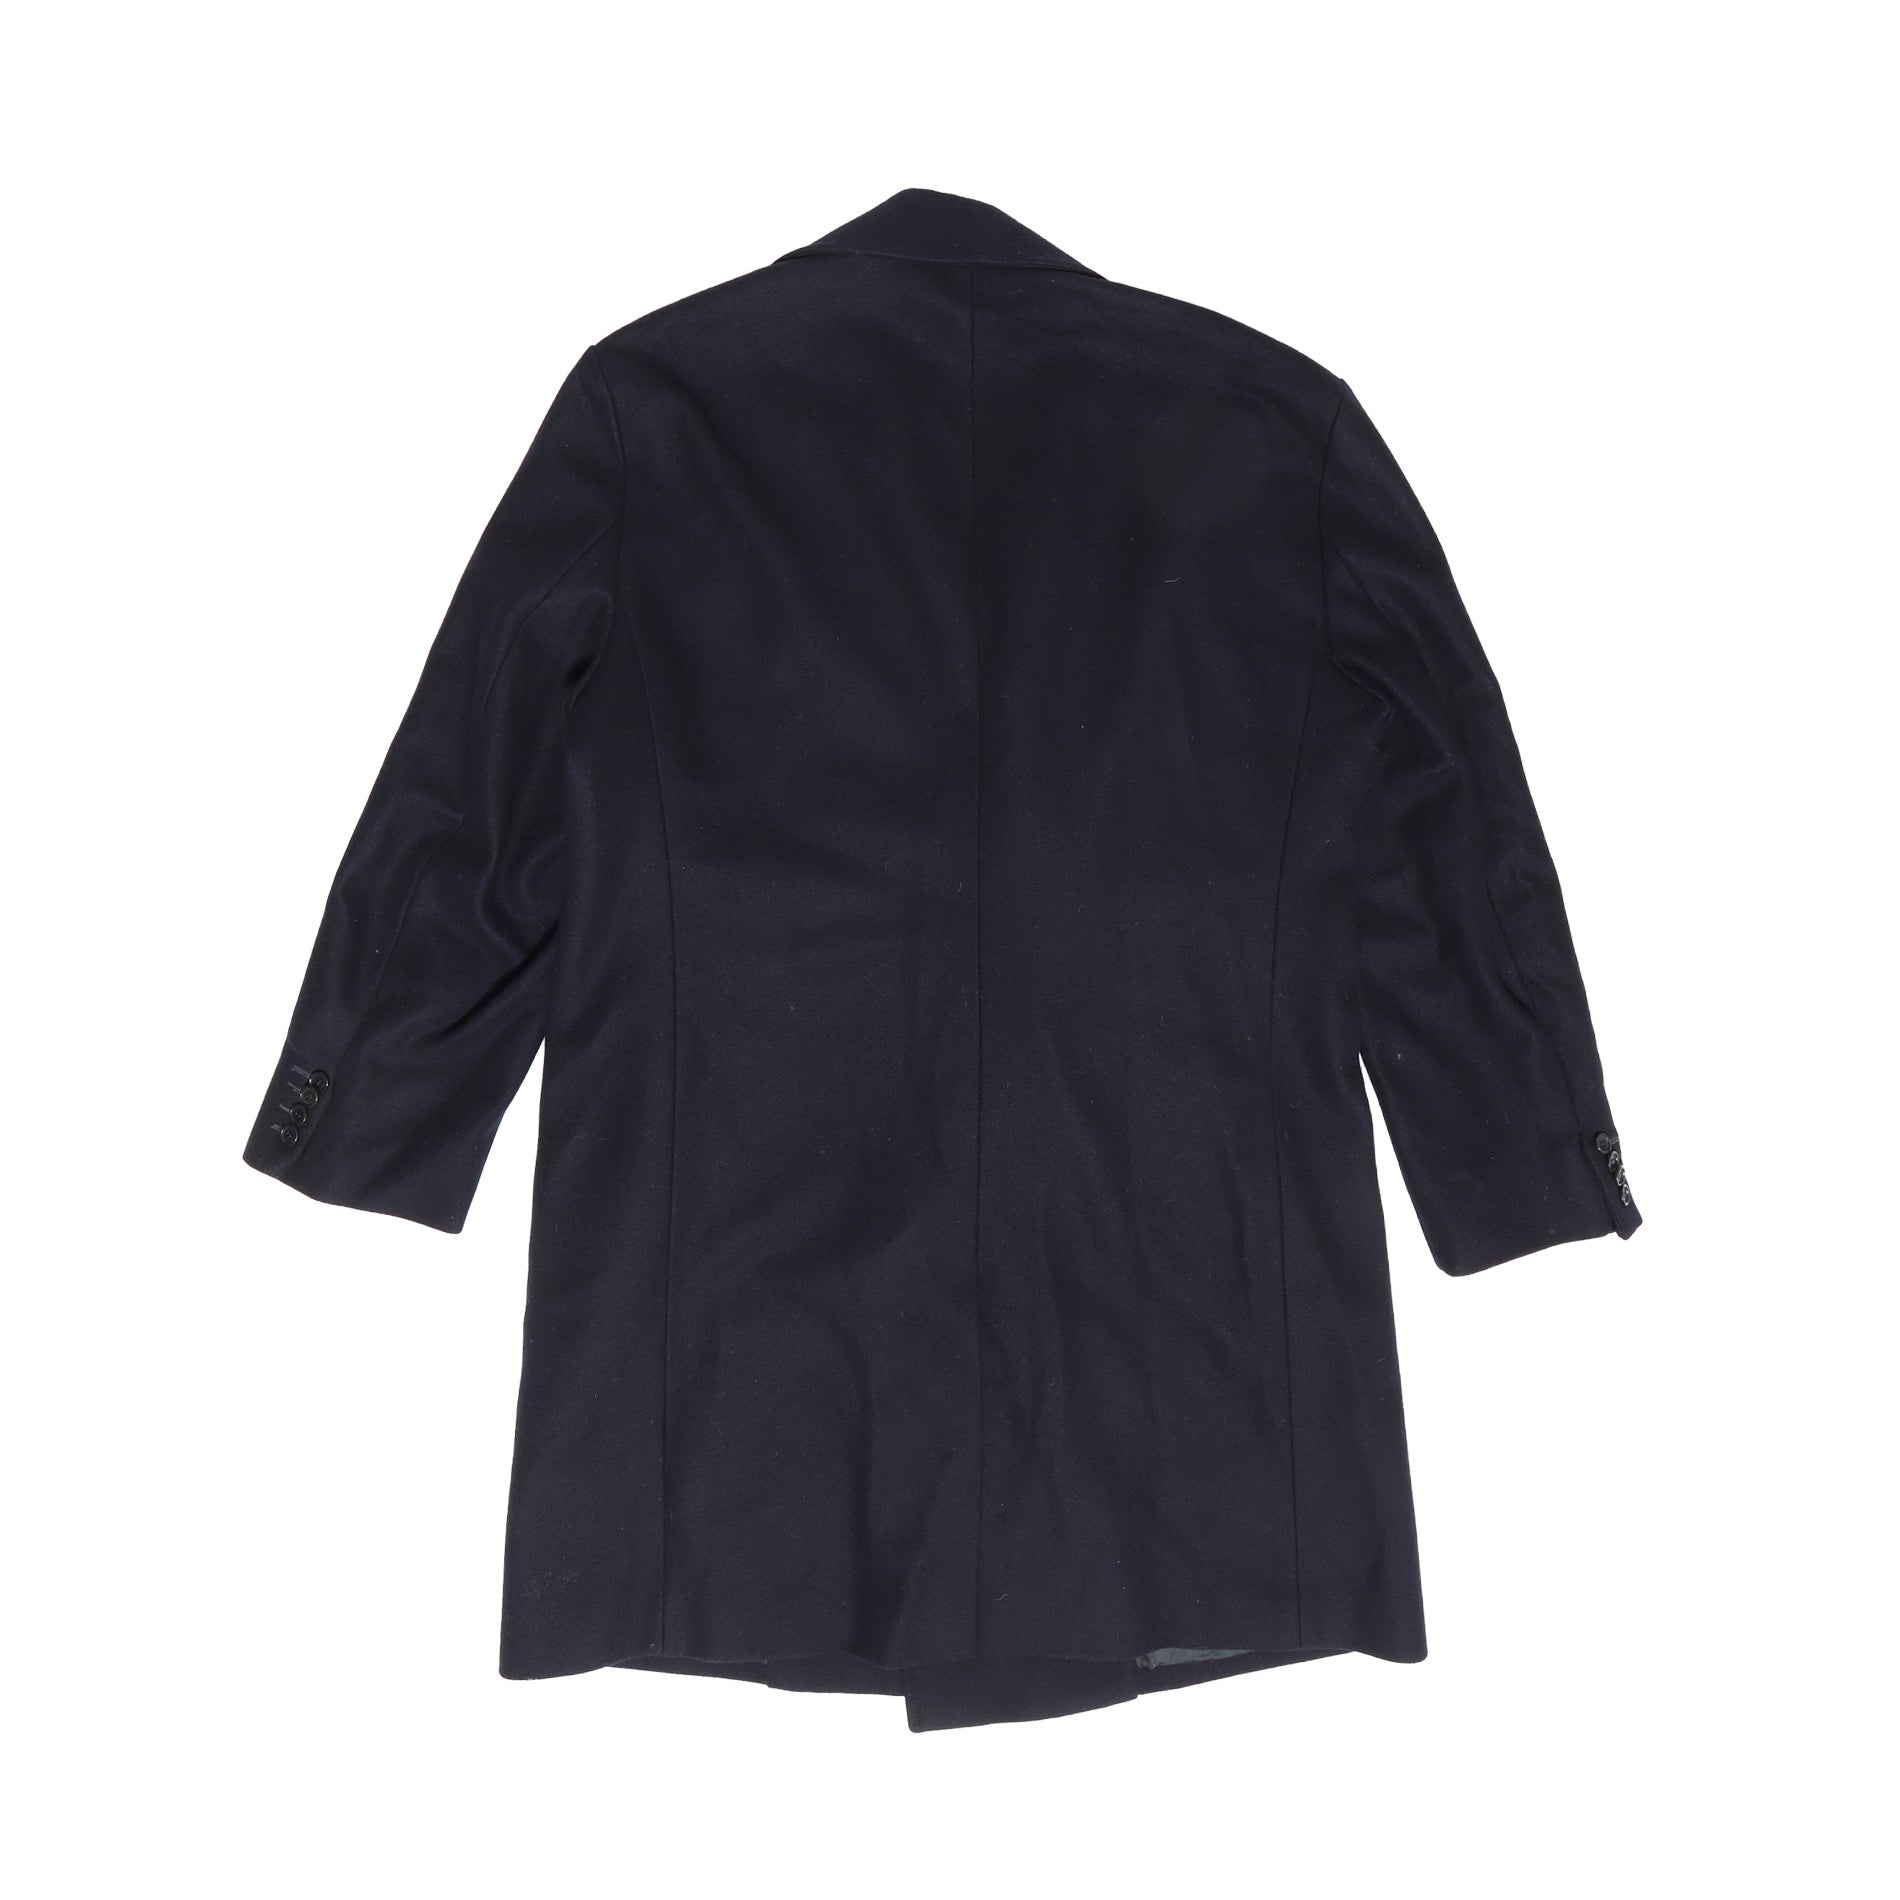 Helmut Lang Archival Double Breasted Wool Coat